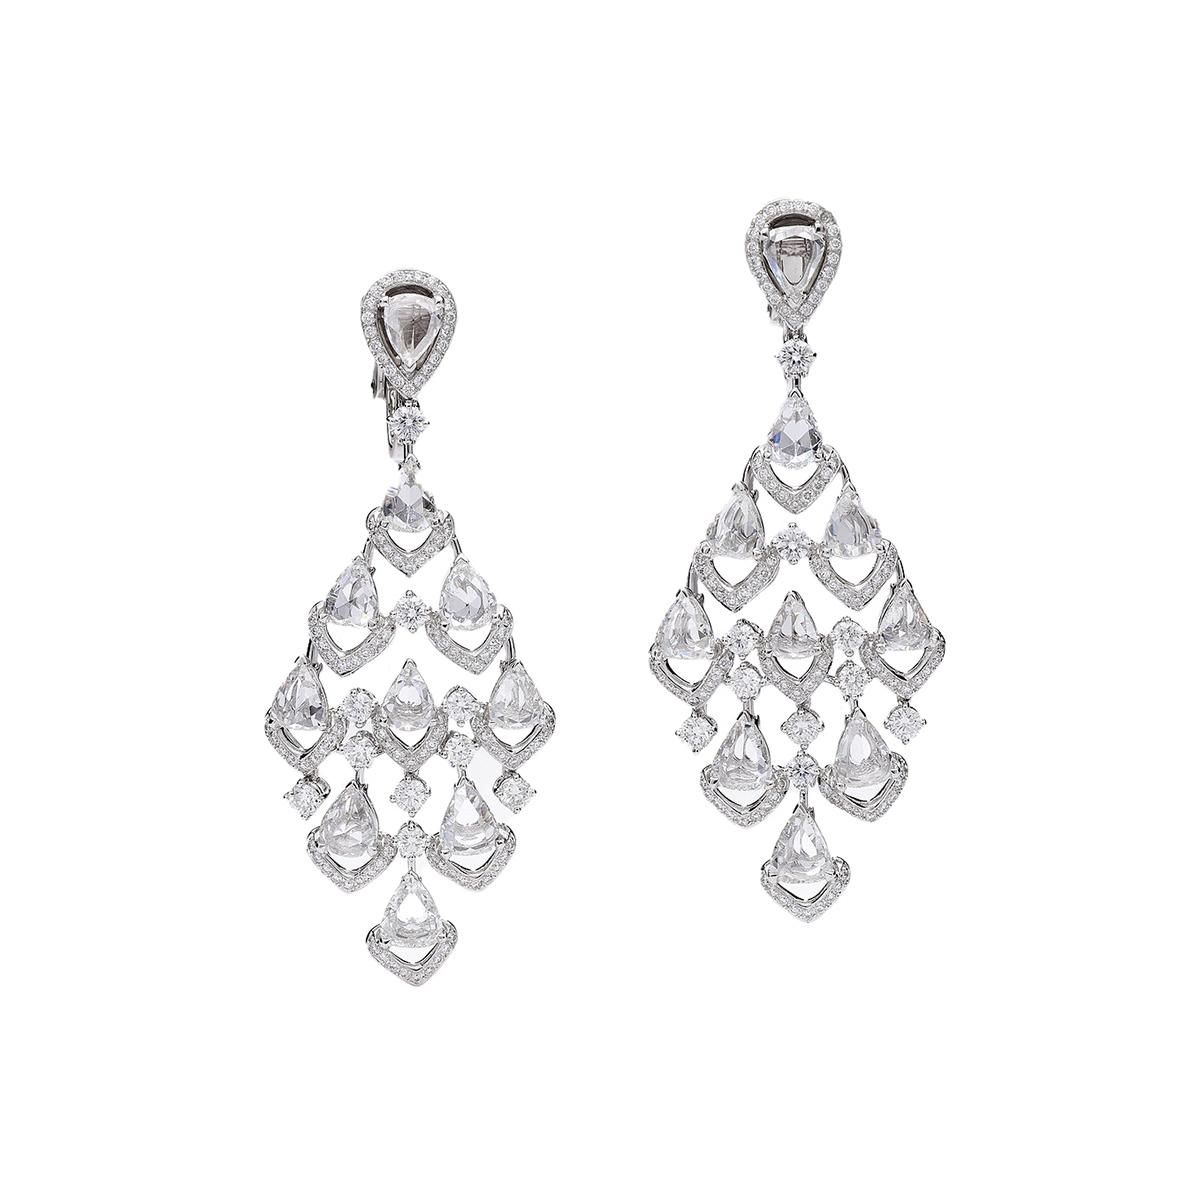 Earring in 18kt white gold set with 20 pear-shaped rose cut diamonds 8.68 cts and 224 diamonds 2.63 cts